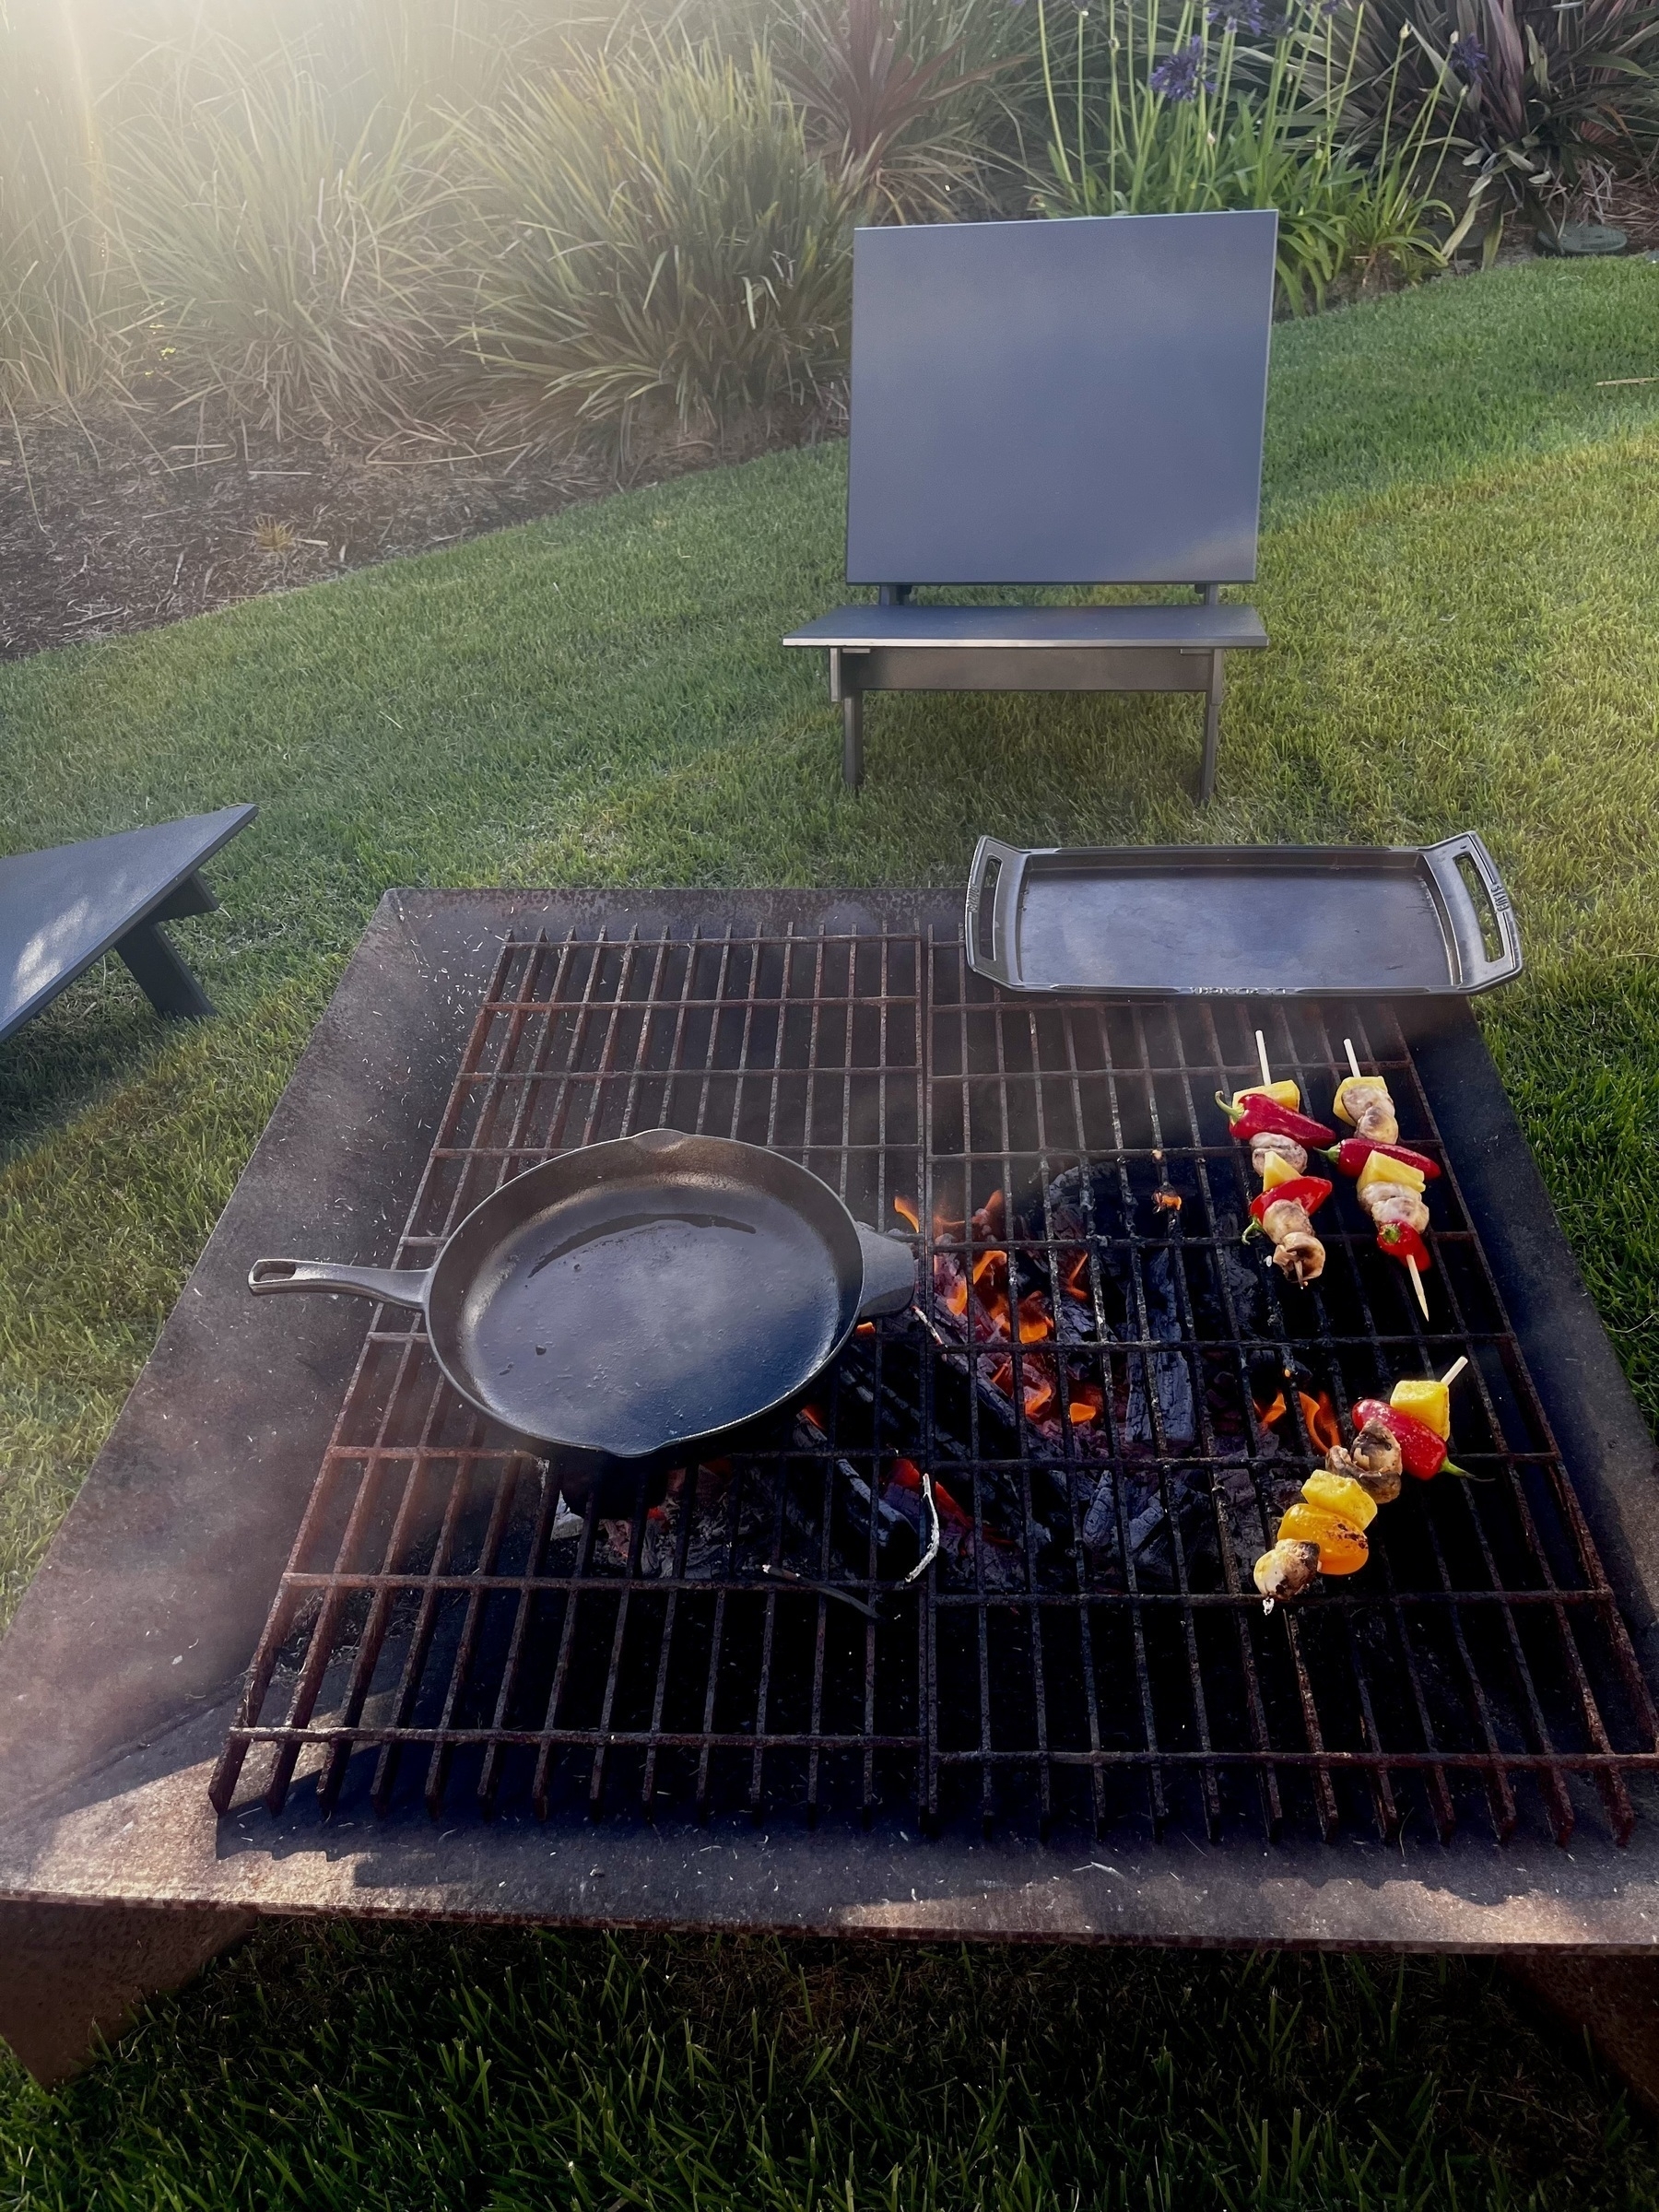 A grill with a pan and skewers of meat and vegetables is set up outdoors on a grassy area with chairs in the background.